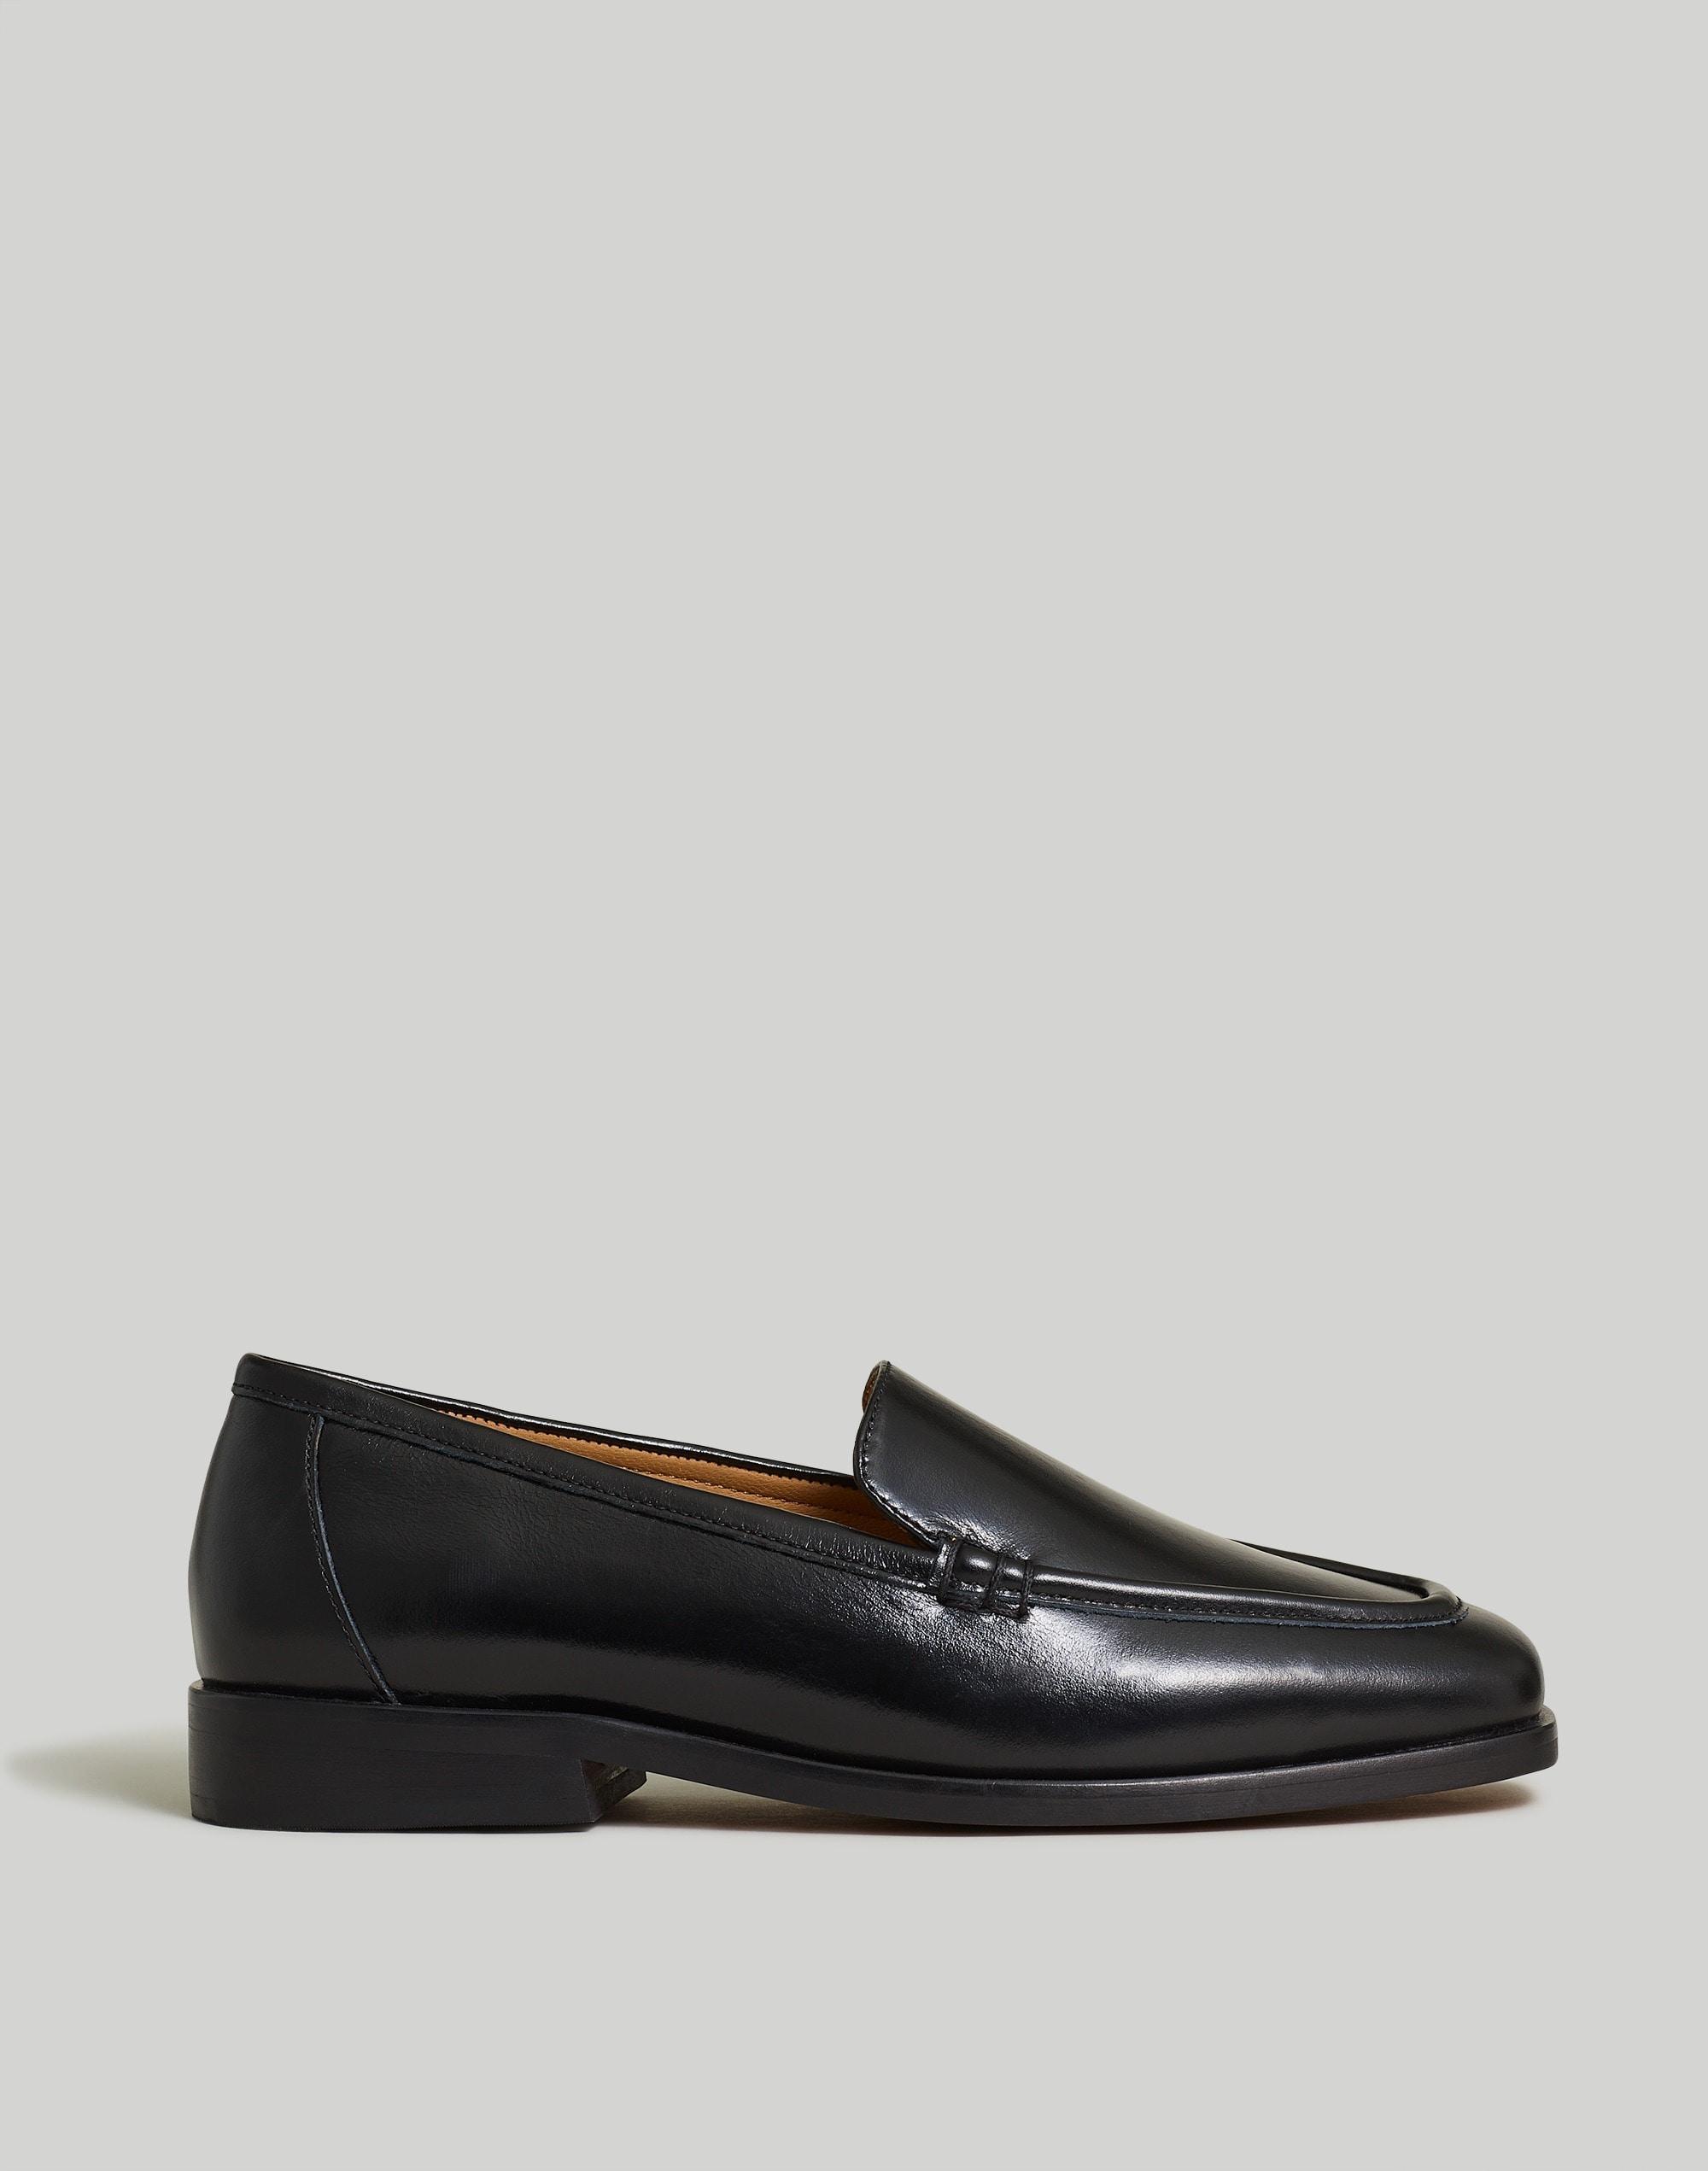 The Bennie Loafer in Leather Product Image